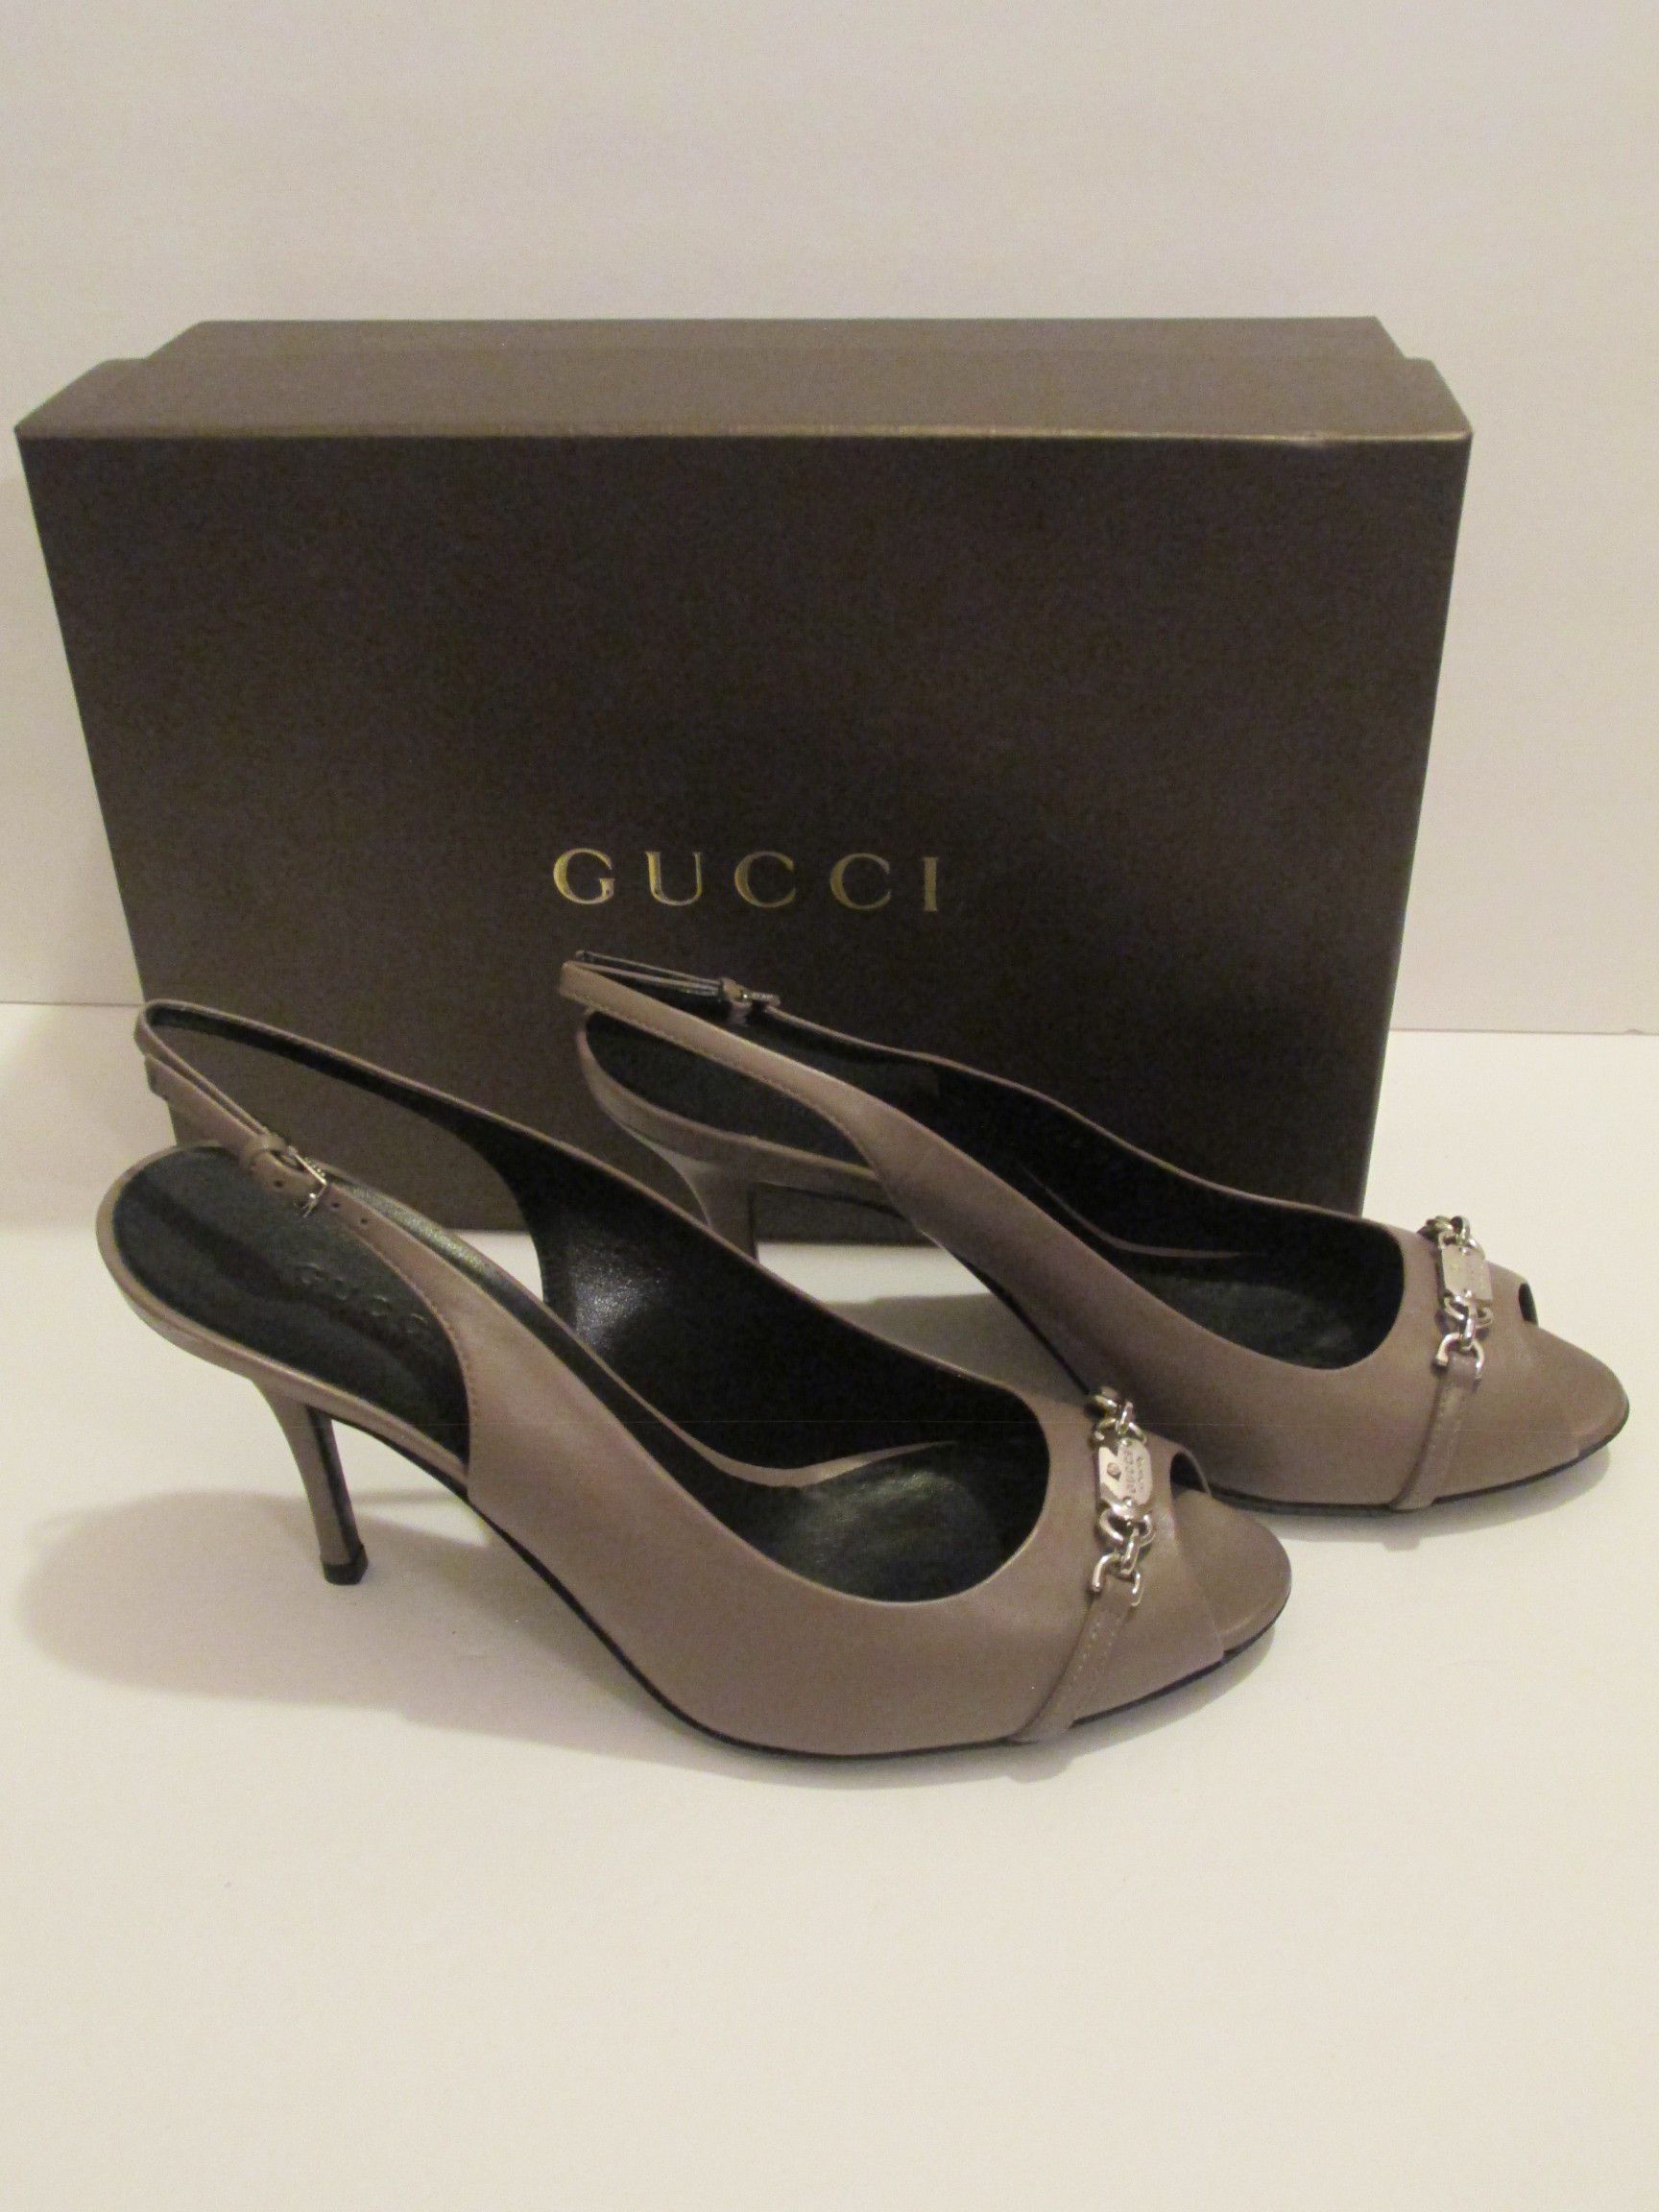 New; Never Worn GUCCI Heels - Size 9